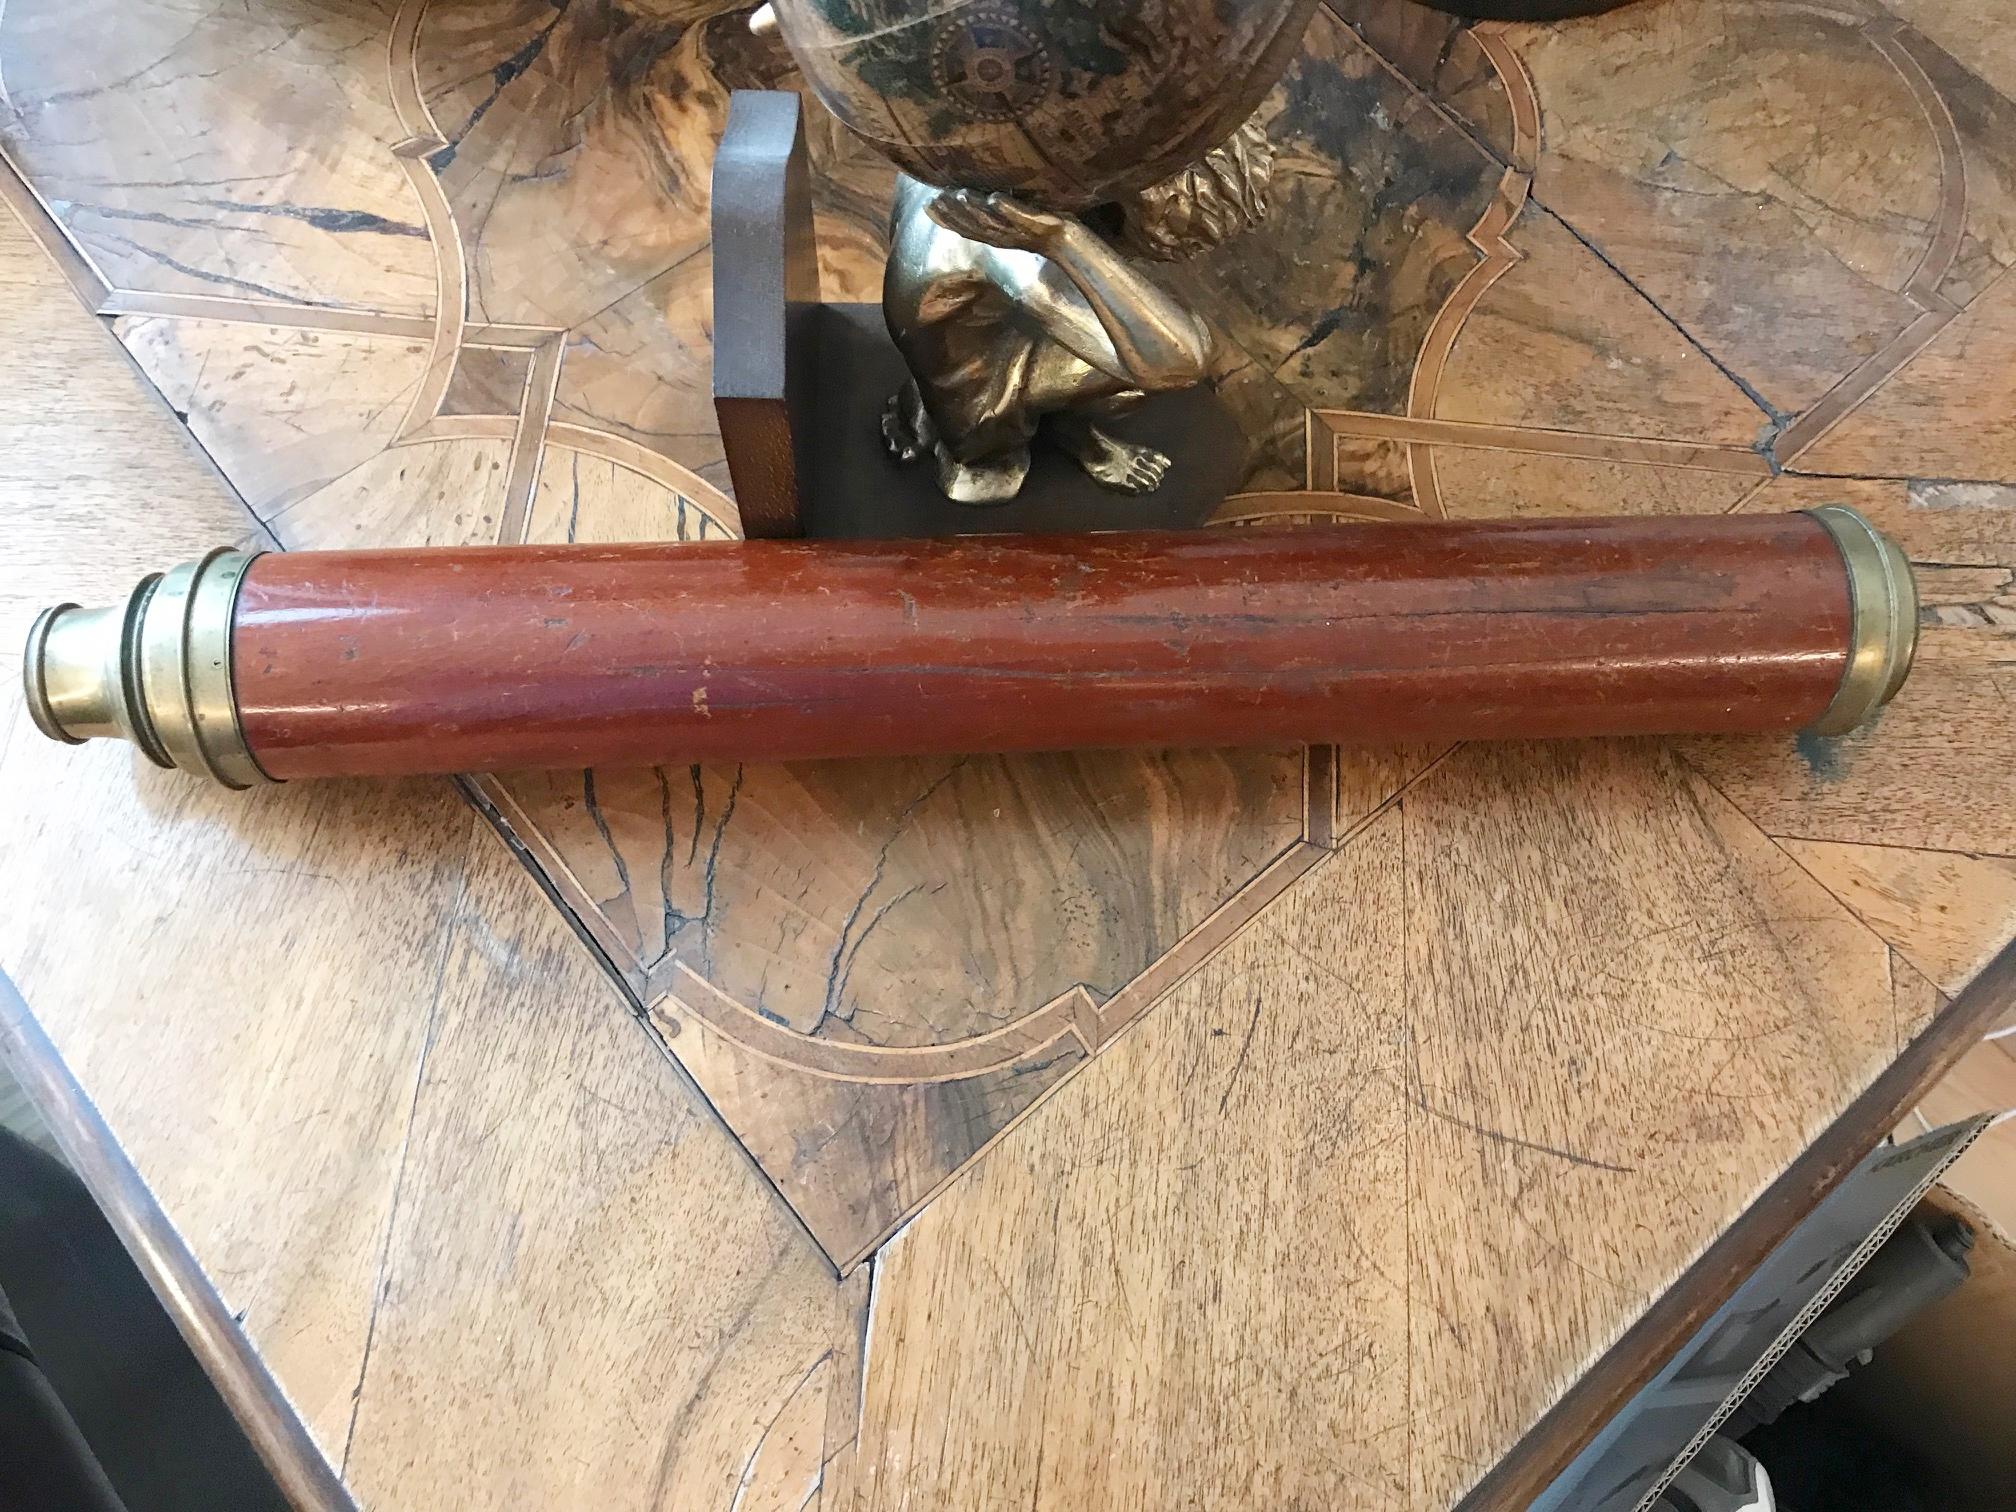 Antique telescope made of brass and wood, circa 1820

A brass tube, which can be pushed into a wooden tube, lenses available, but it seems that the connector between the inner and outer tube is missing, because the inner tube can be completely